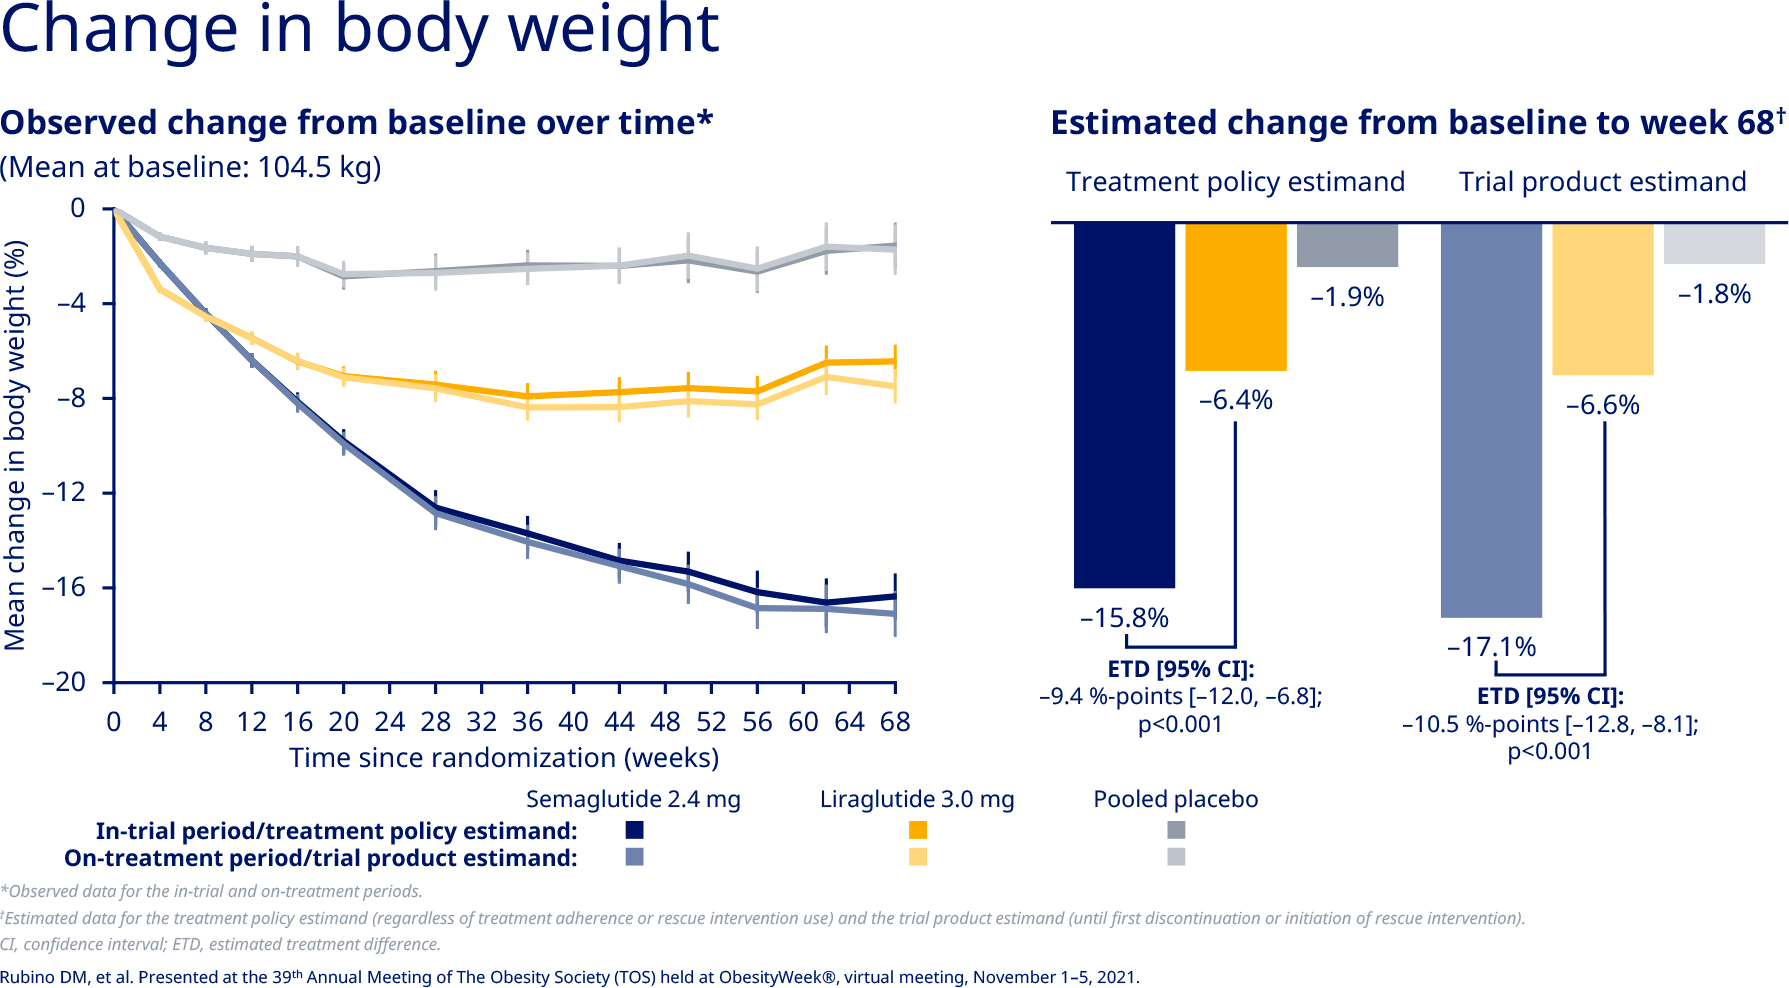 nct04074161 results 01 - Wegovy: Impressive Success of Semaglutide for Weight Loss